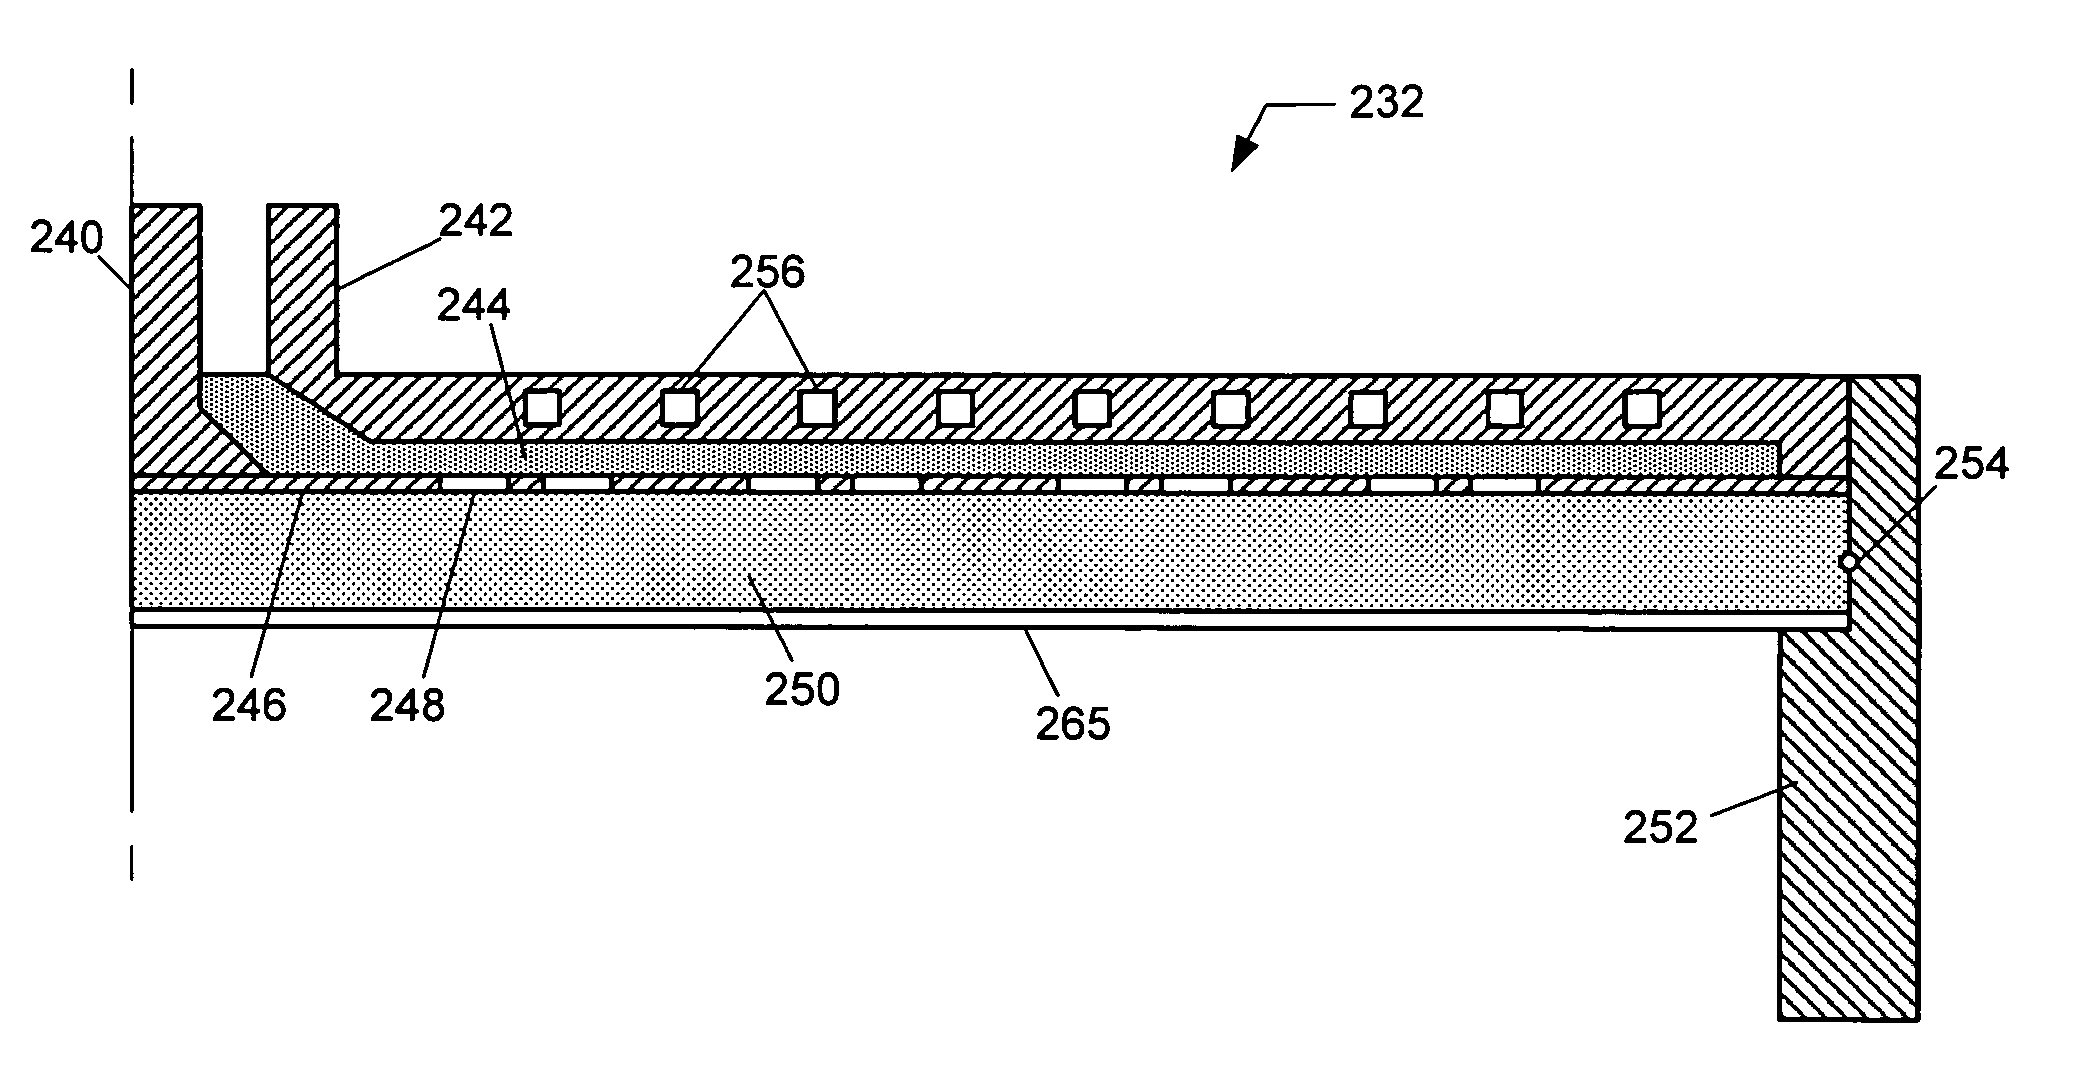 Surface wave plasma processing system and method of using